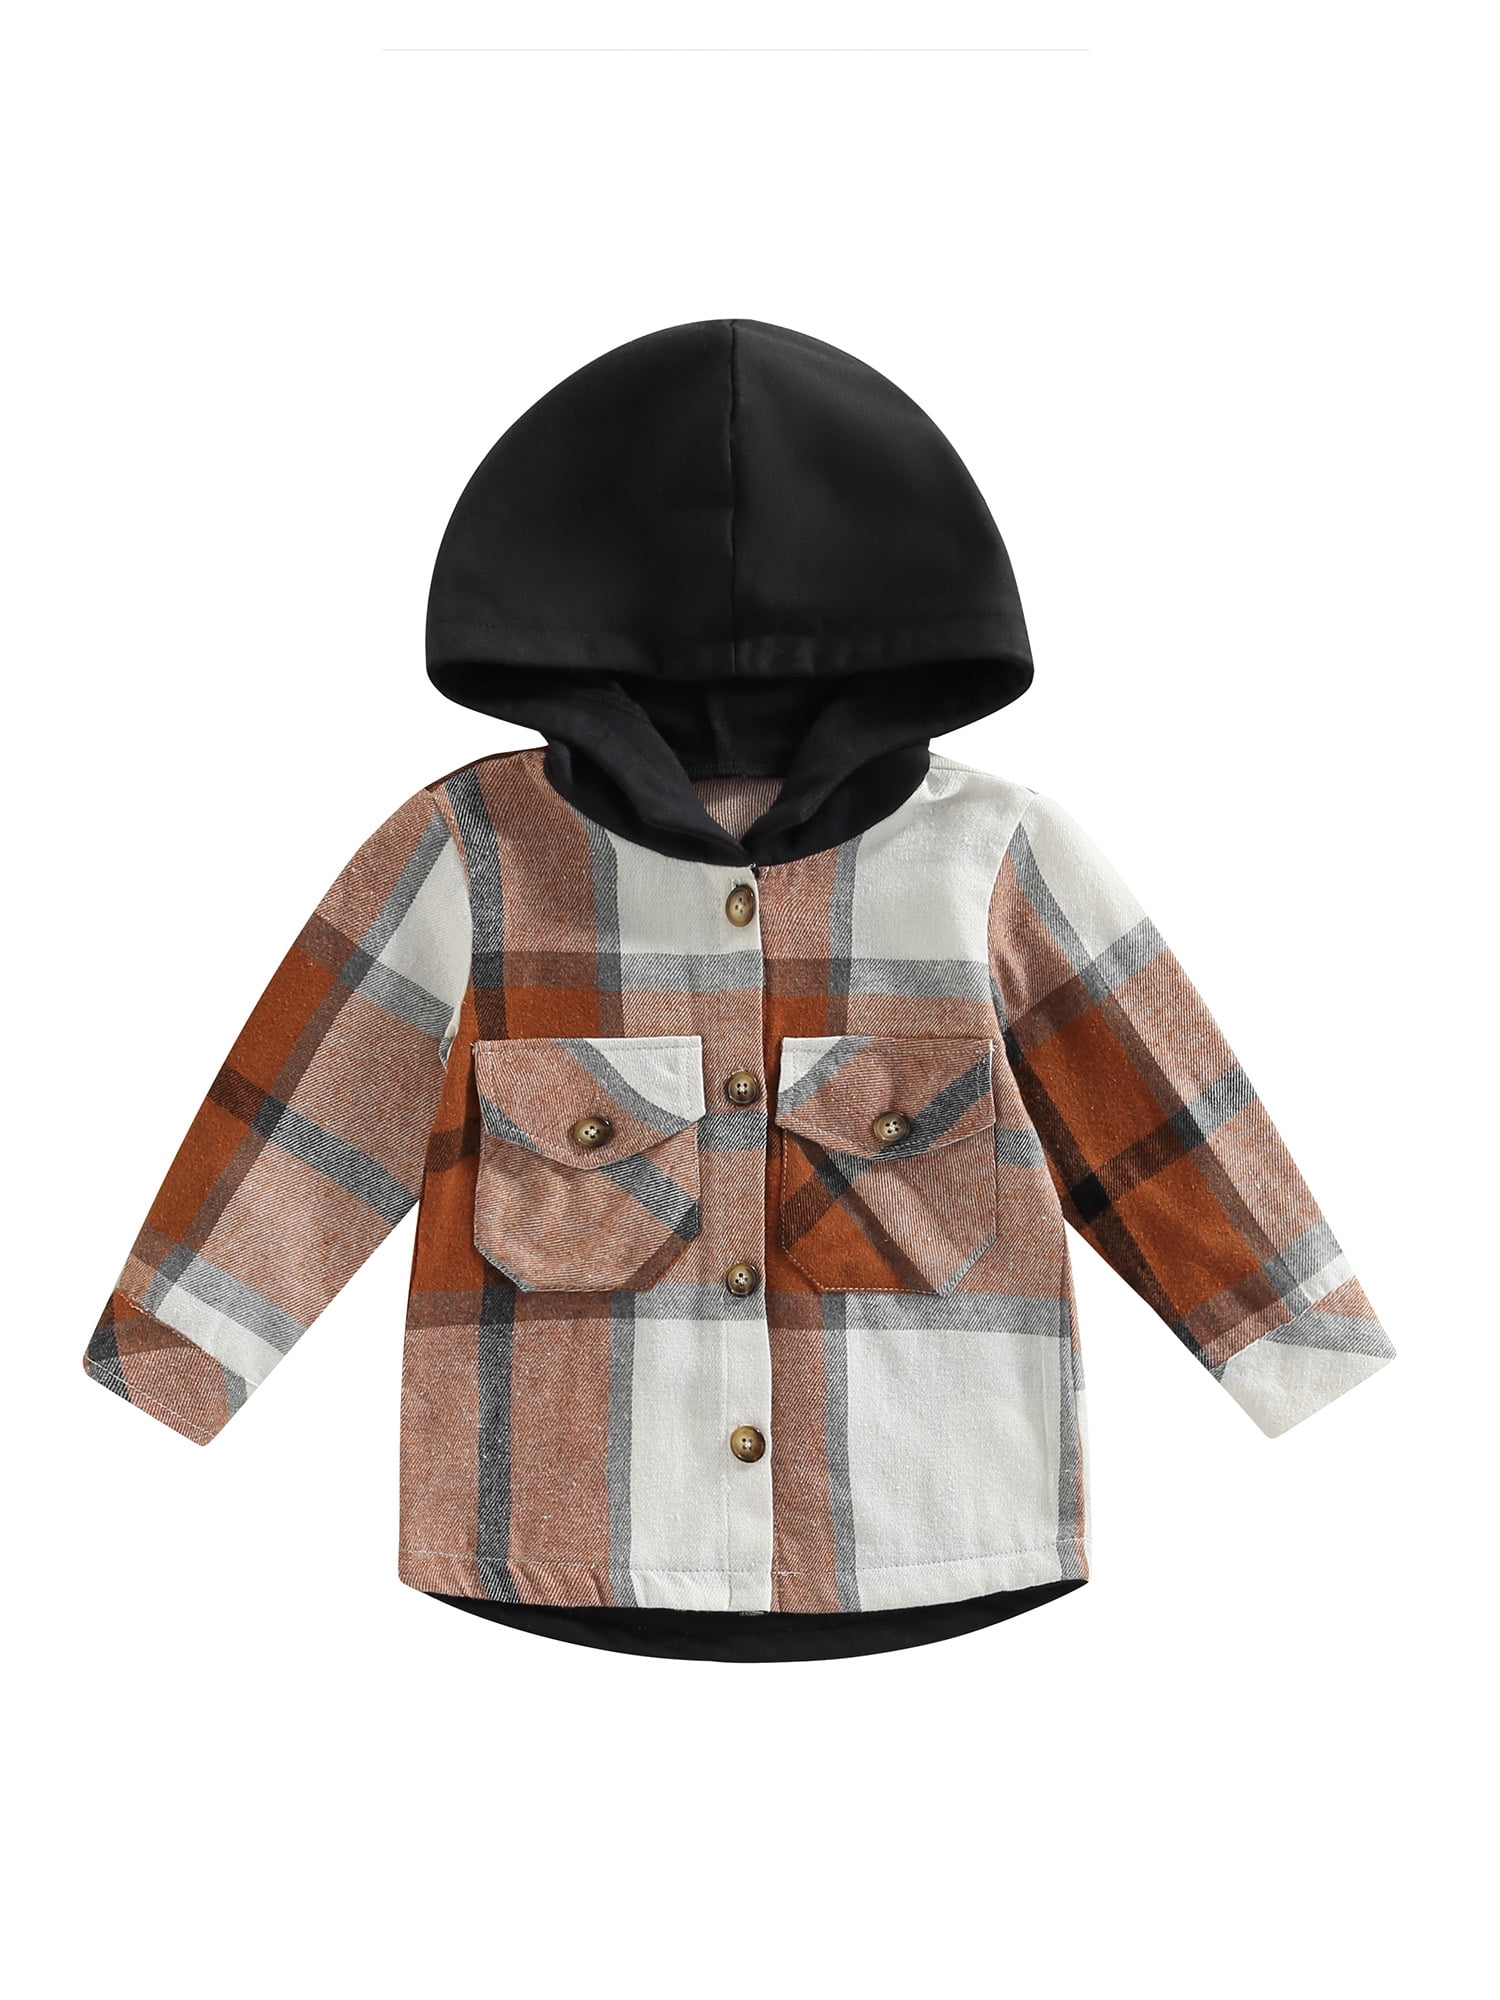 Toddler Baby Kid Clothes Boy Girl Hooded Hoodies Coat Jacket Casual Outwear Tops 